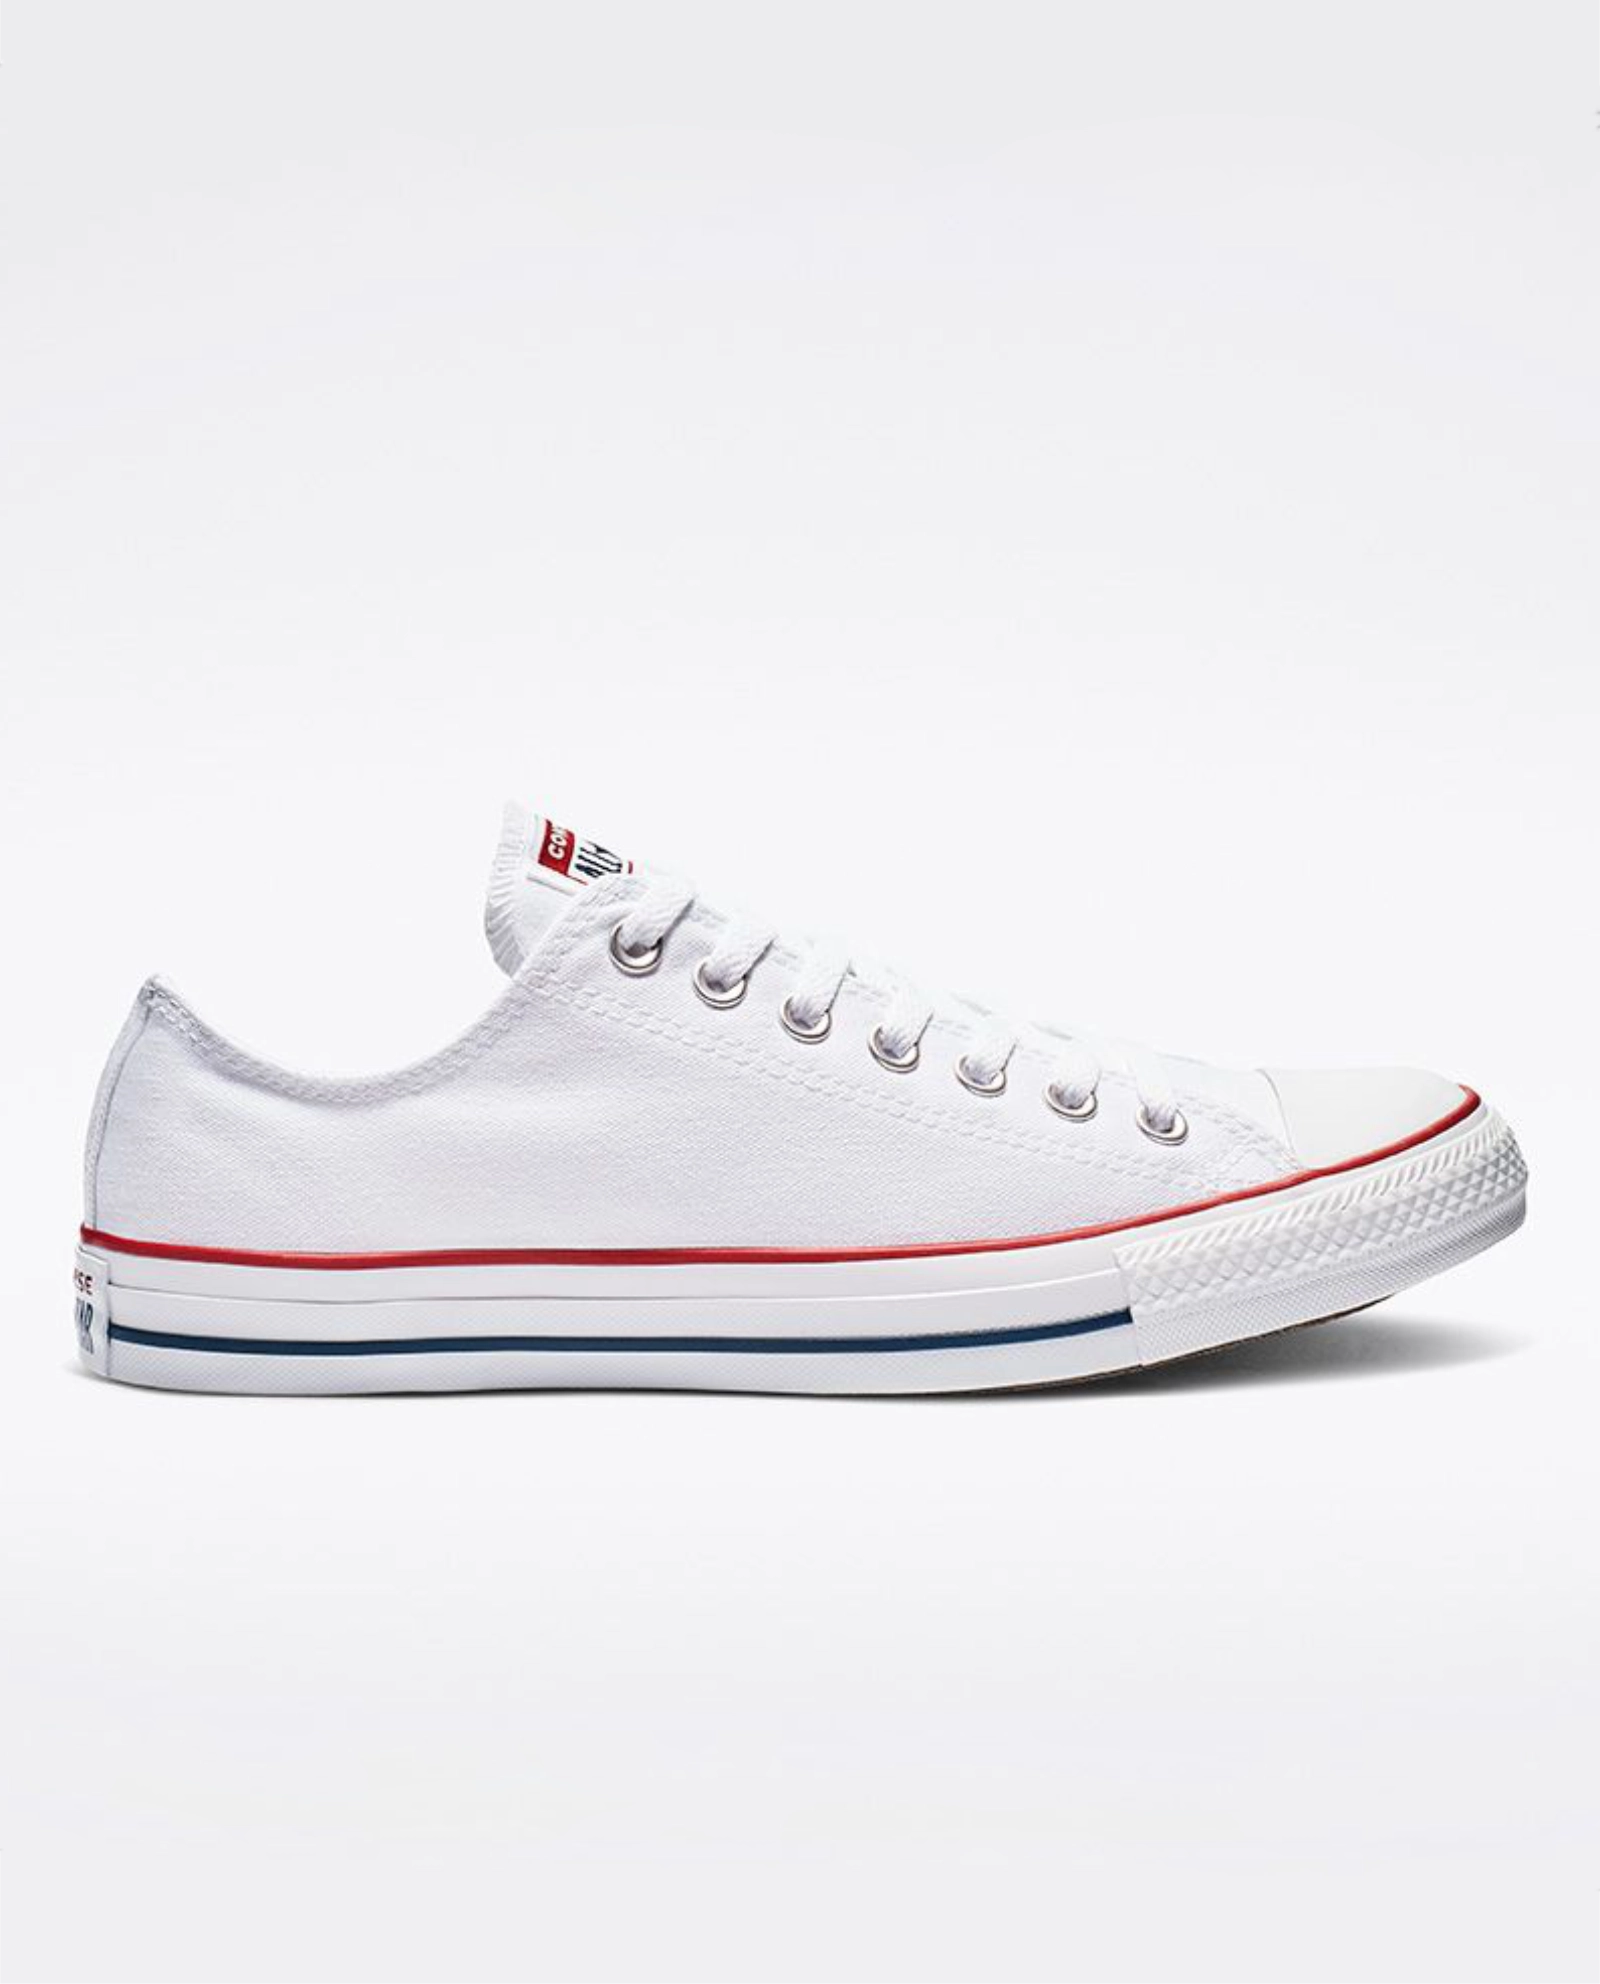 Chuck Taylor All Star Low Top Shoelace Length